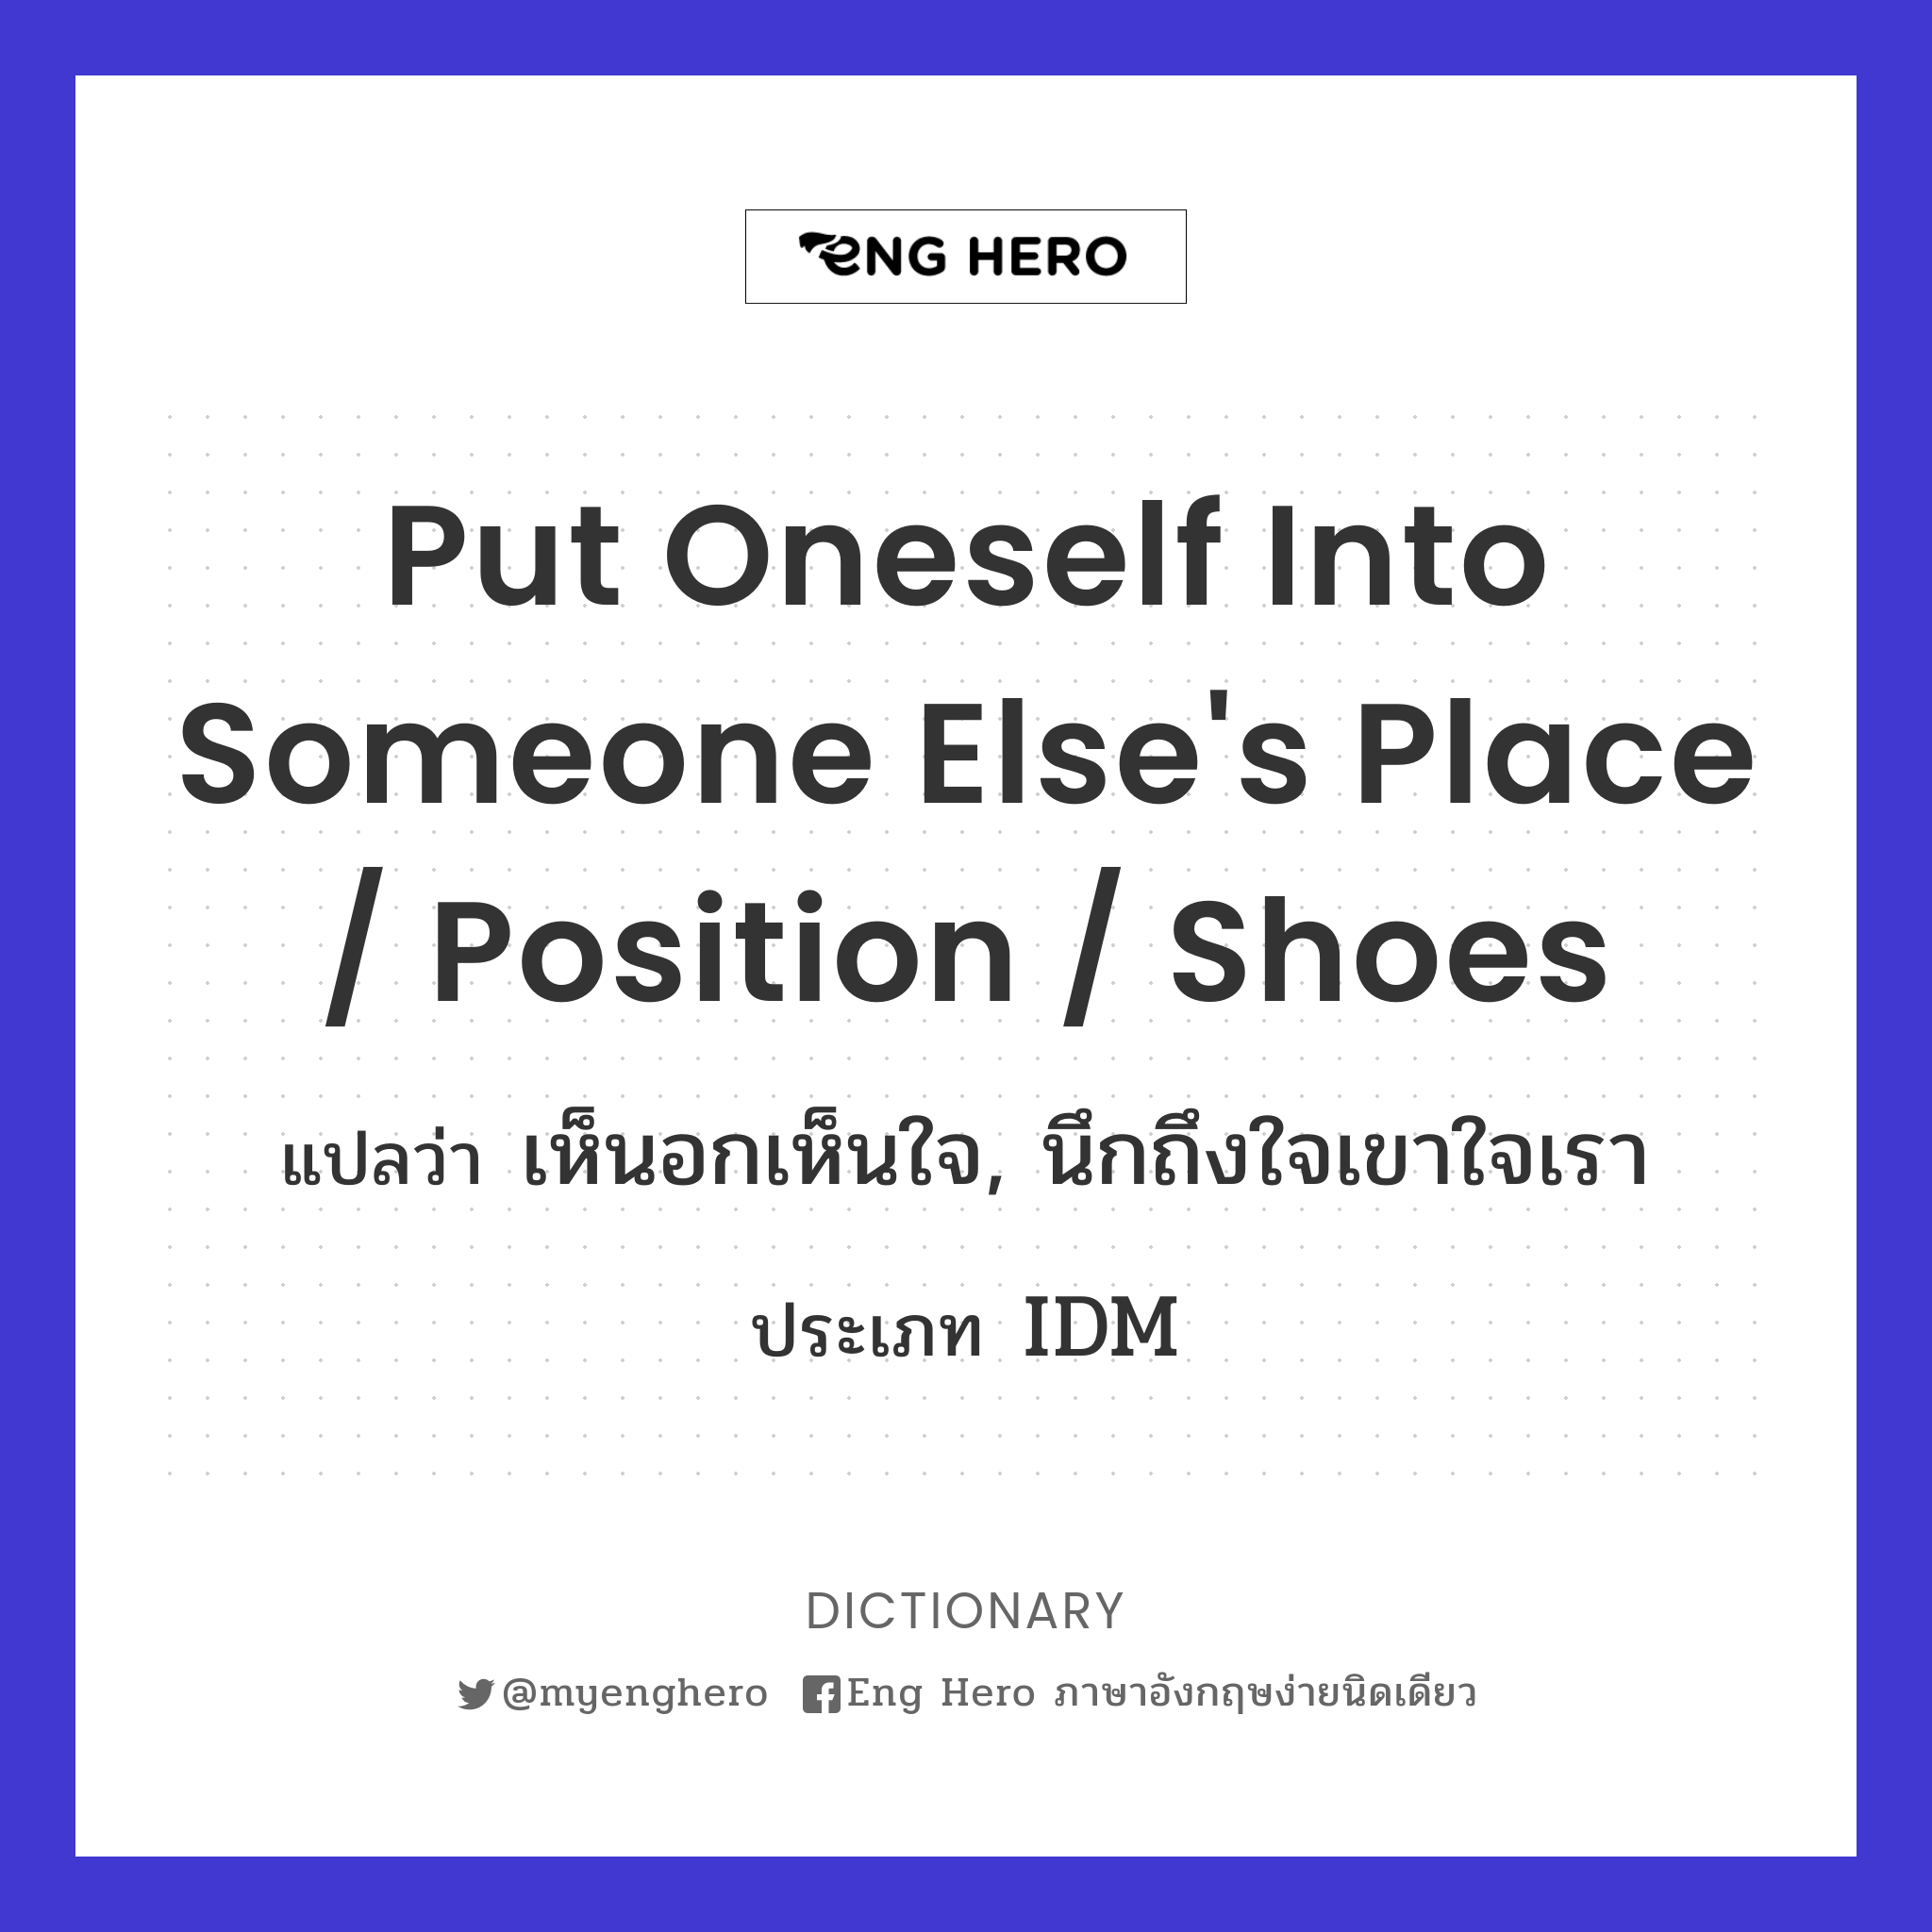 put oneself into someone else's place / position / shoes